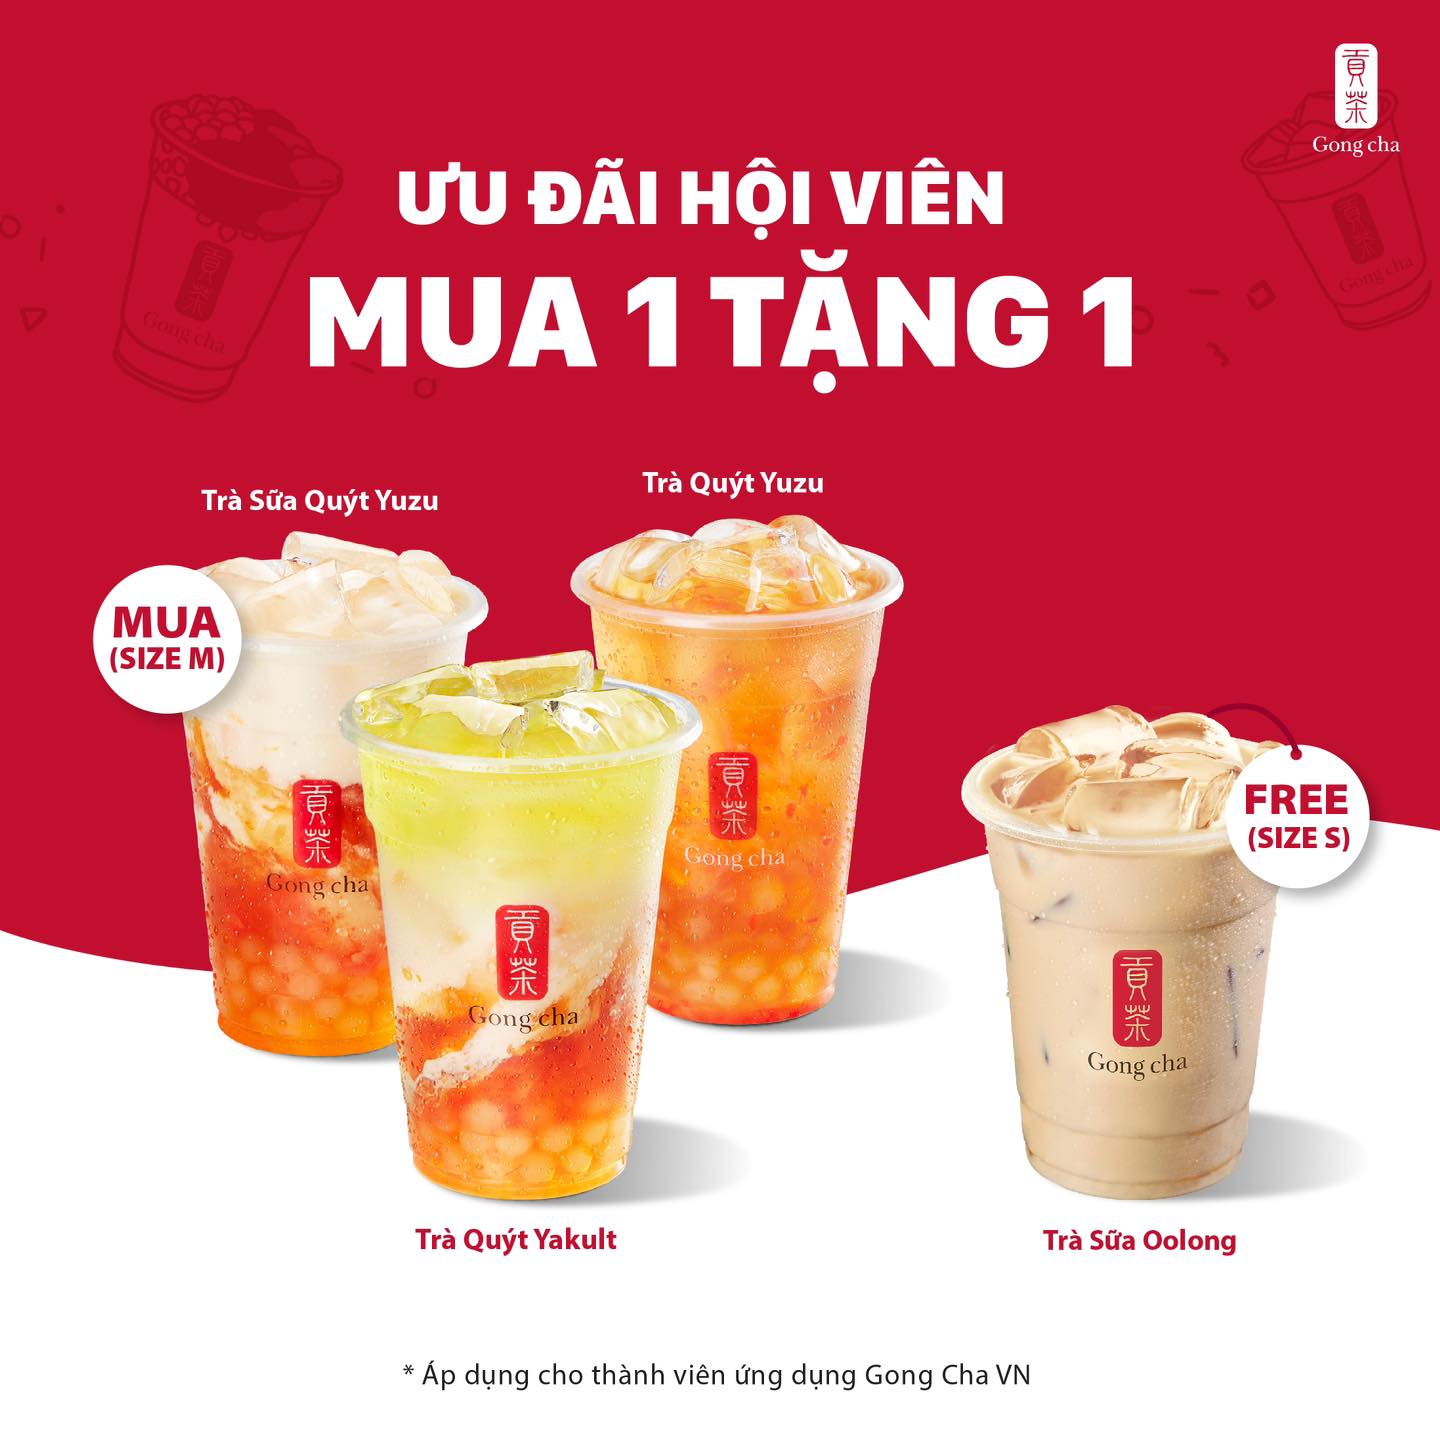 Buy 1 Get 1 Free – One Day Only! Gong Cha Vietnam